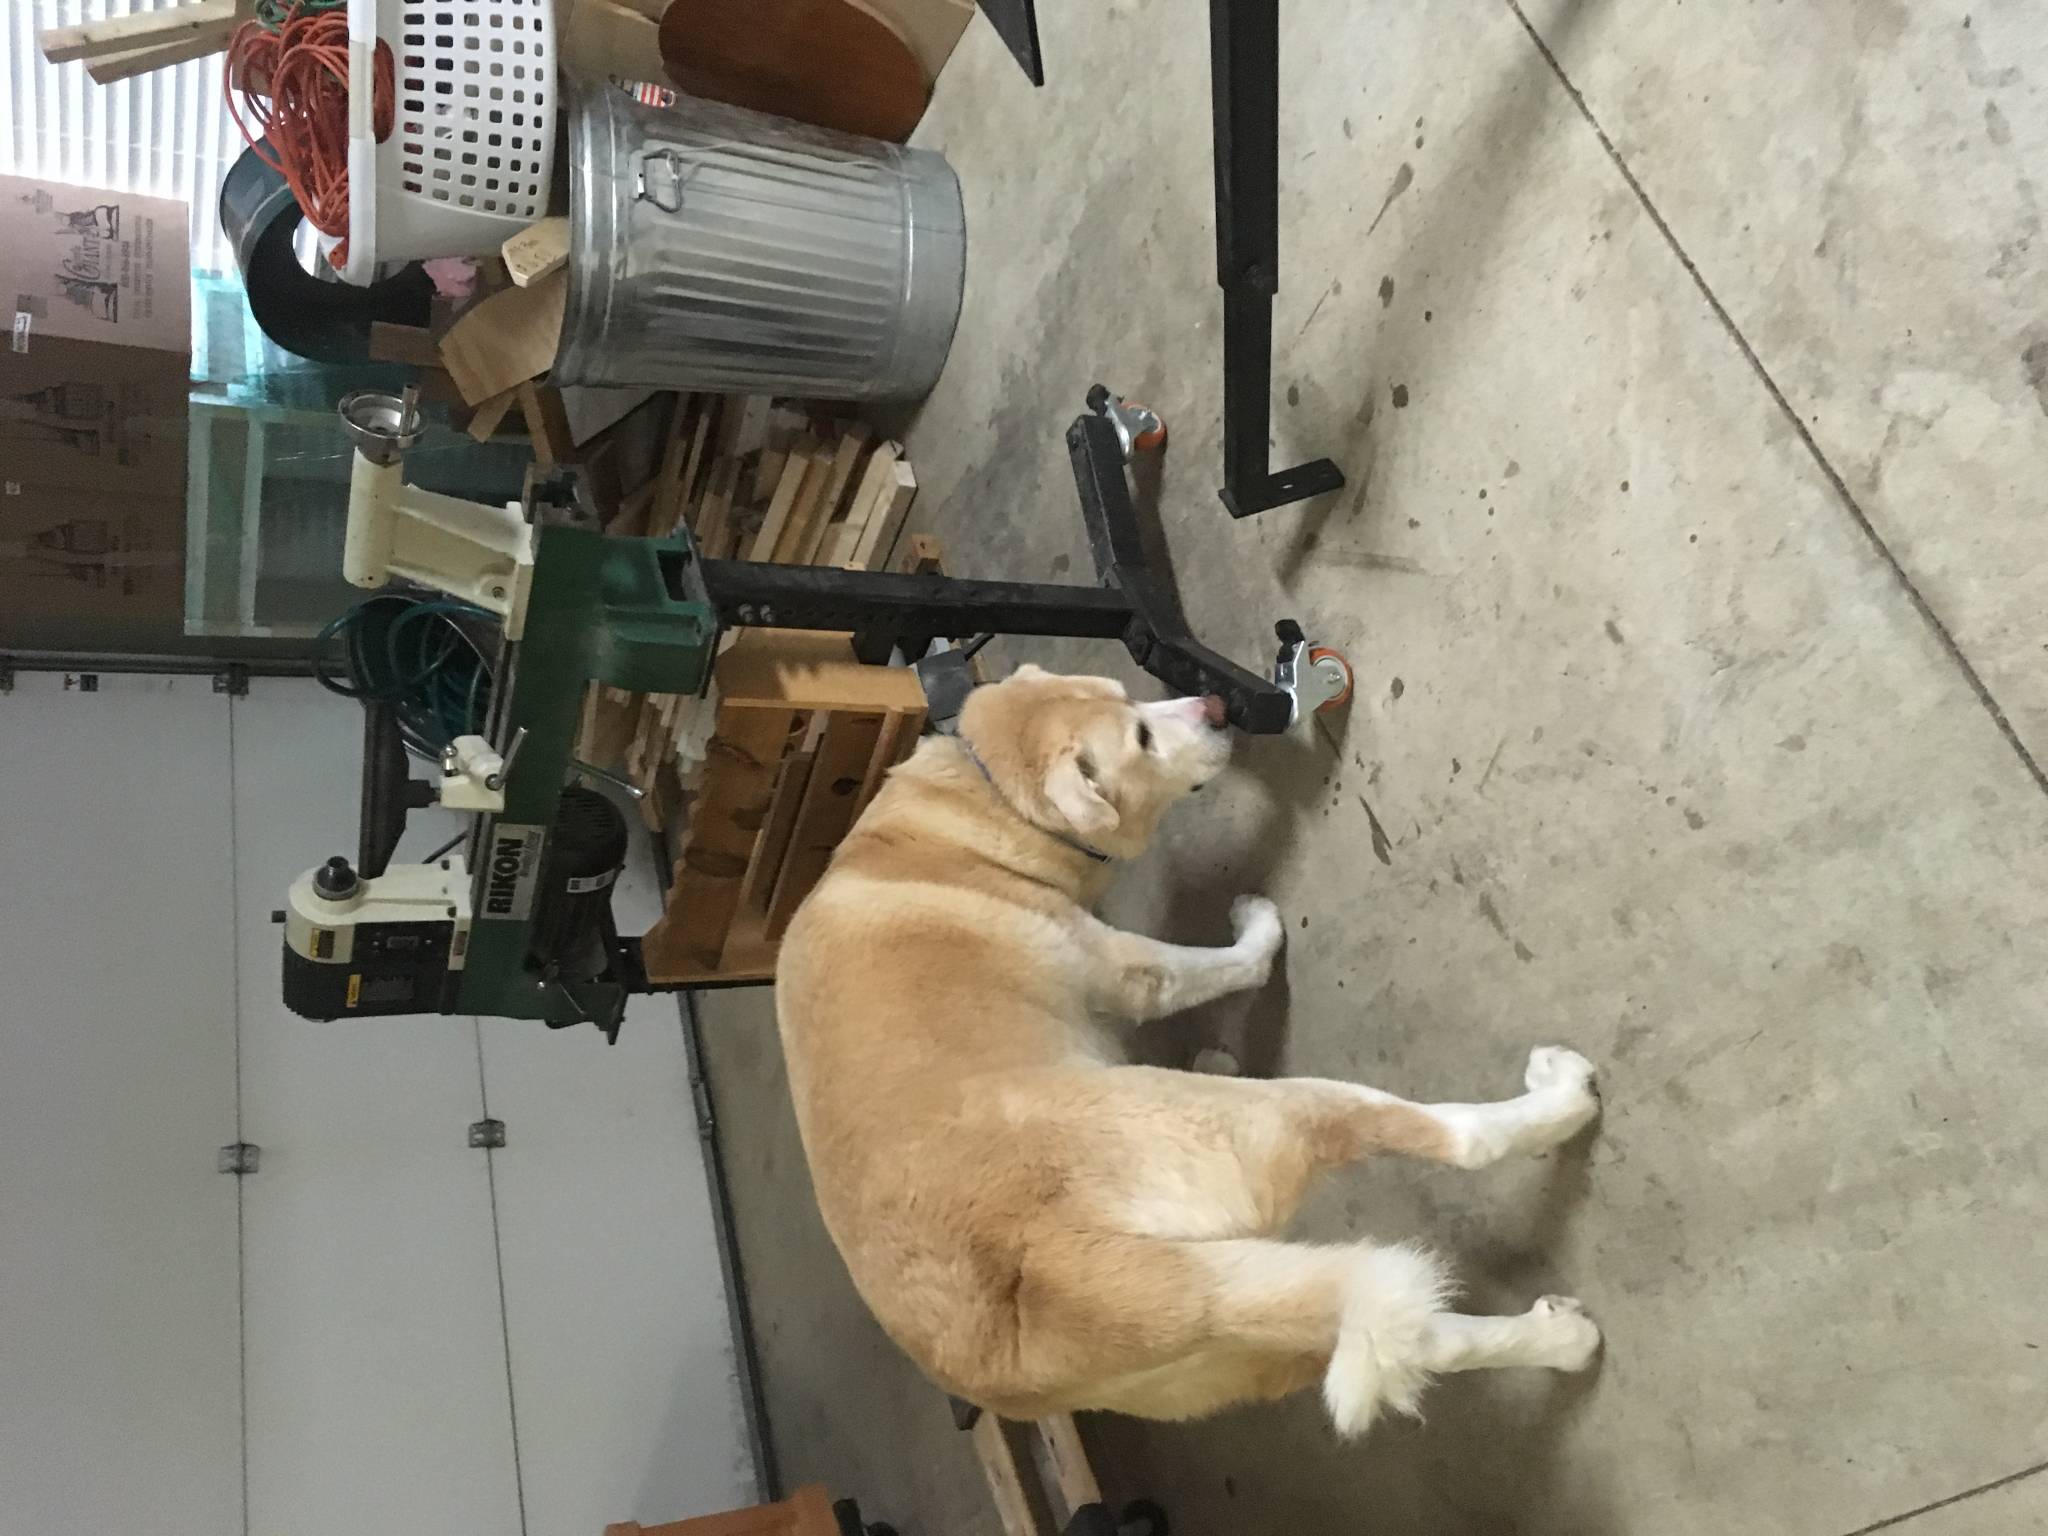 My pup liked the goodwill lathe!